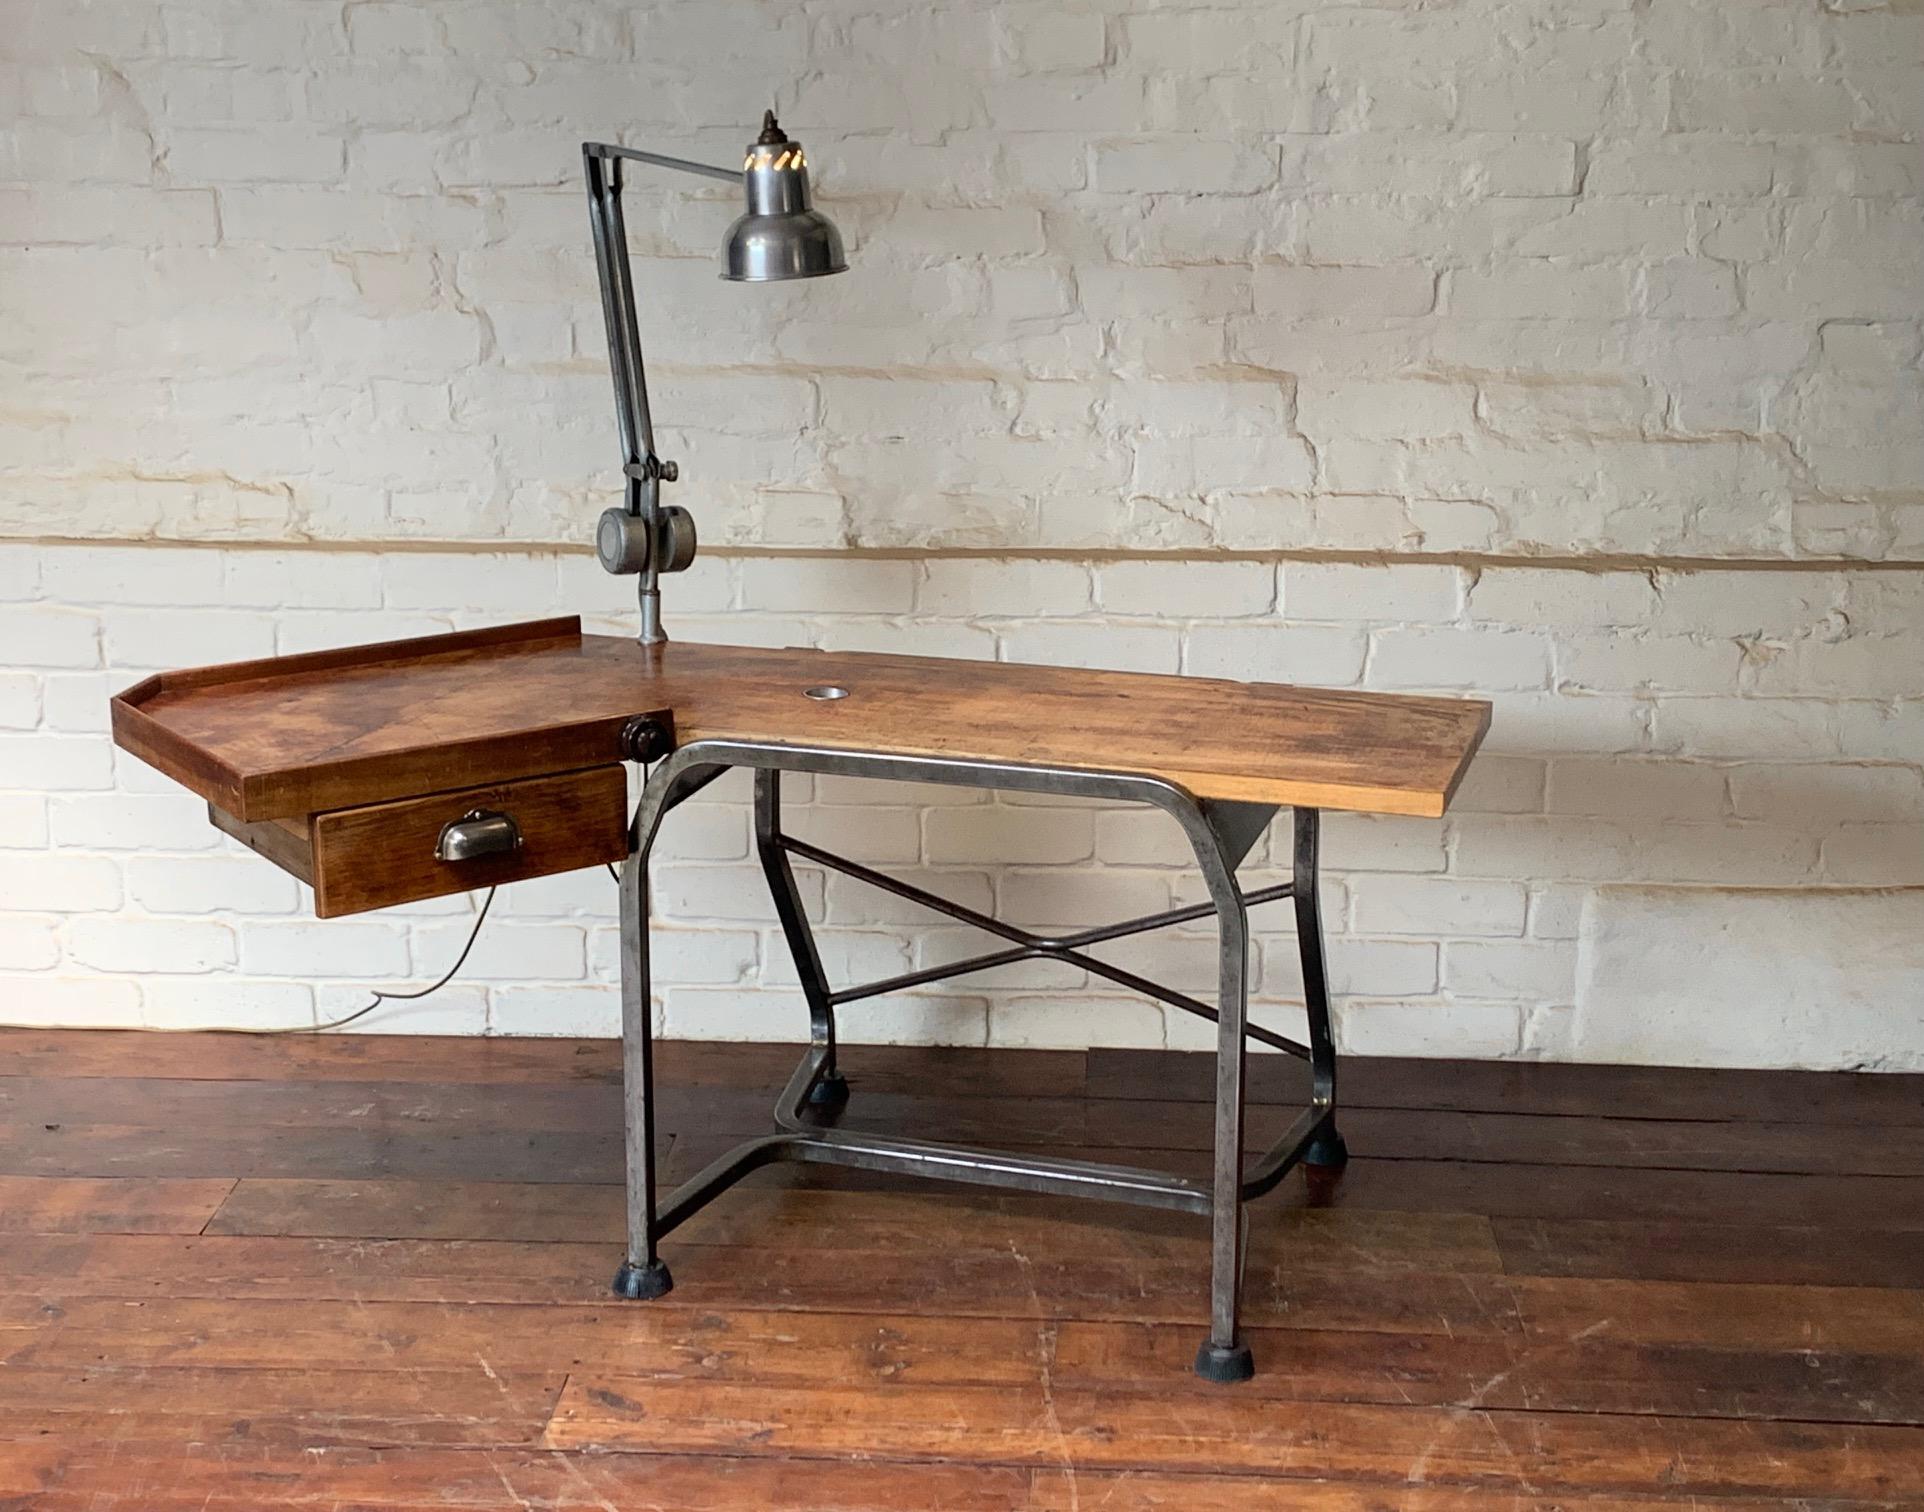 This stylish and highly functional desk was probably a one off commission, its rarity suggests so. It has a built in Bakelite switch that turns on the elegant angle poise light by Admel. The counterbalance moves smoothly around the desk wherever